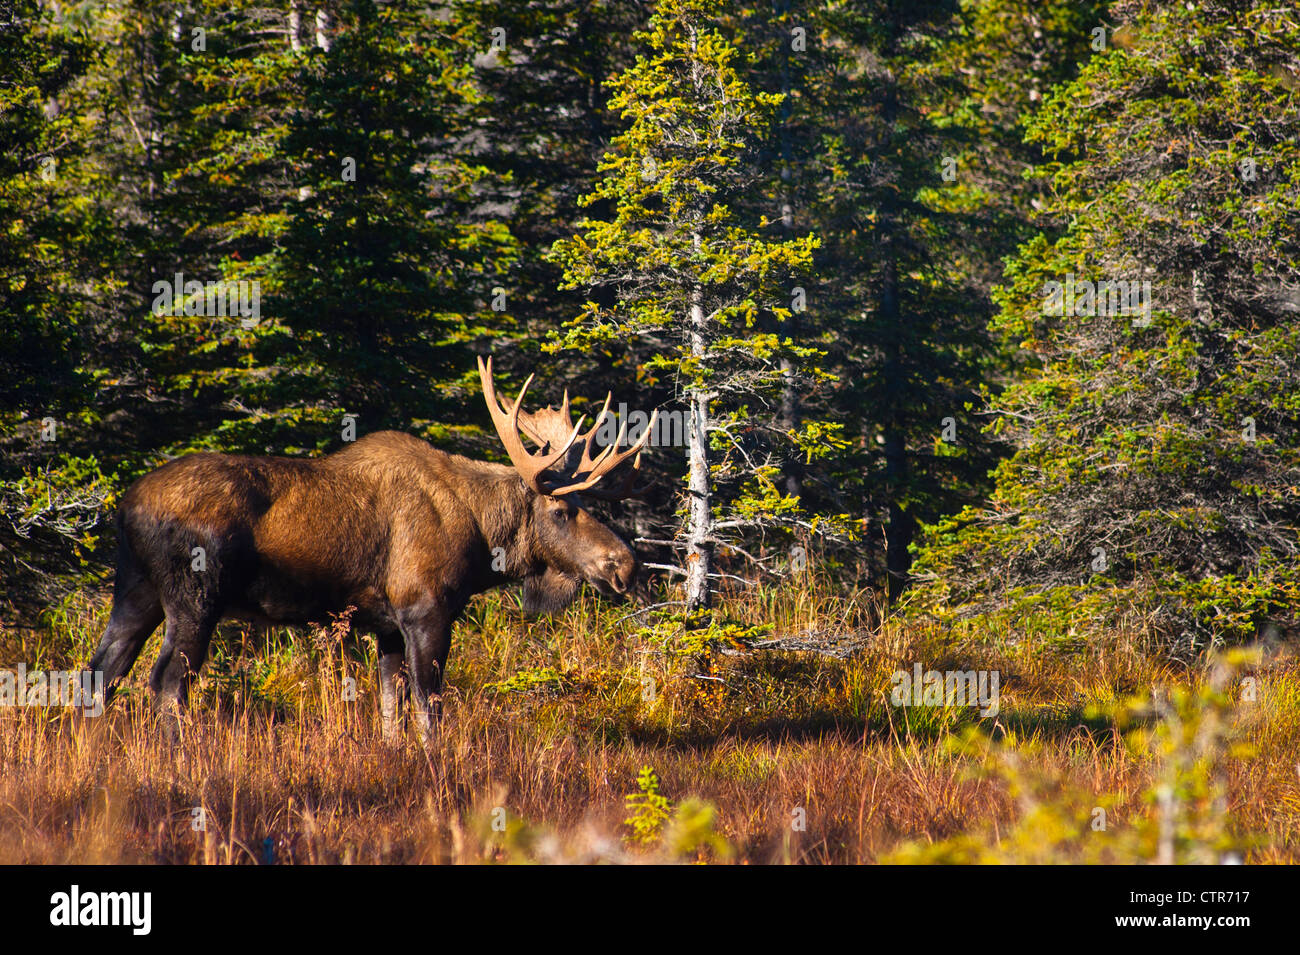 A large bull moose standing near the tree line at Powerline Pass in the Chugach State Park, Alaska Stock Photo